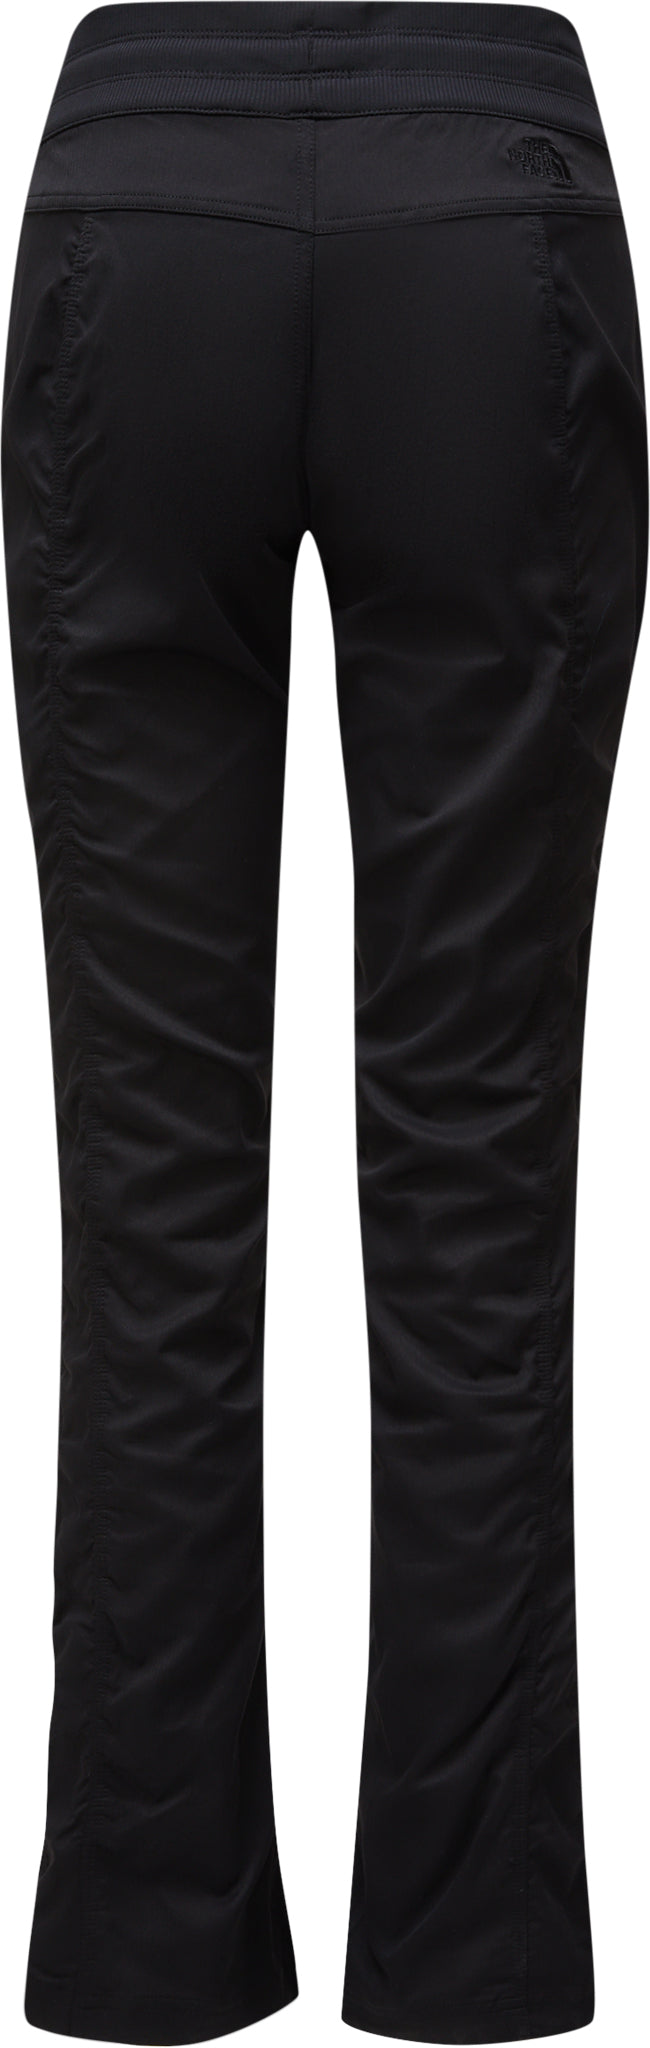 The North Face Extreme Gear Snow Pants Women's Size 12 Black Zip